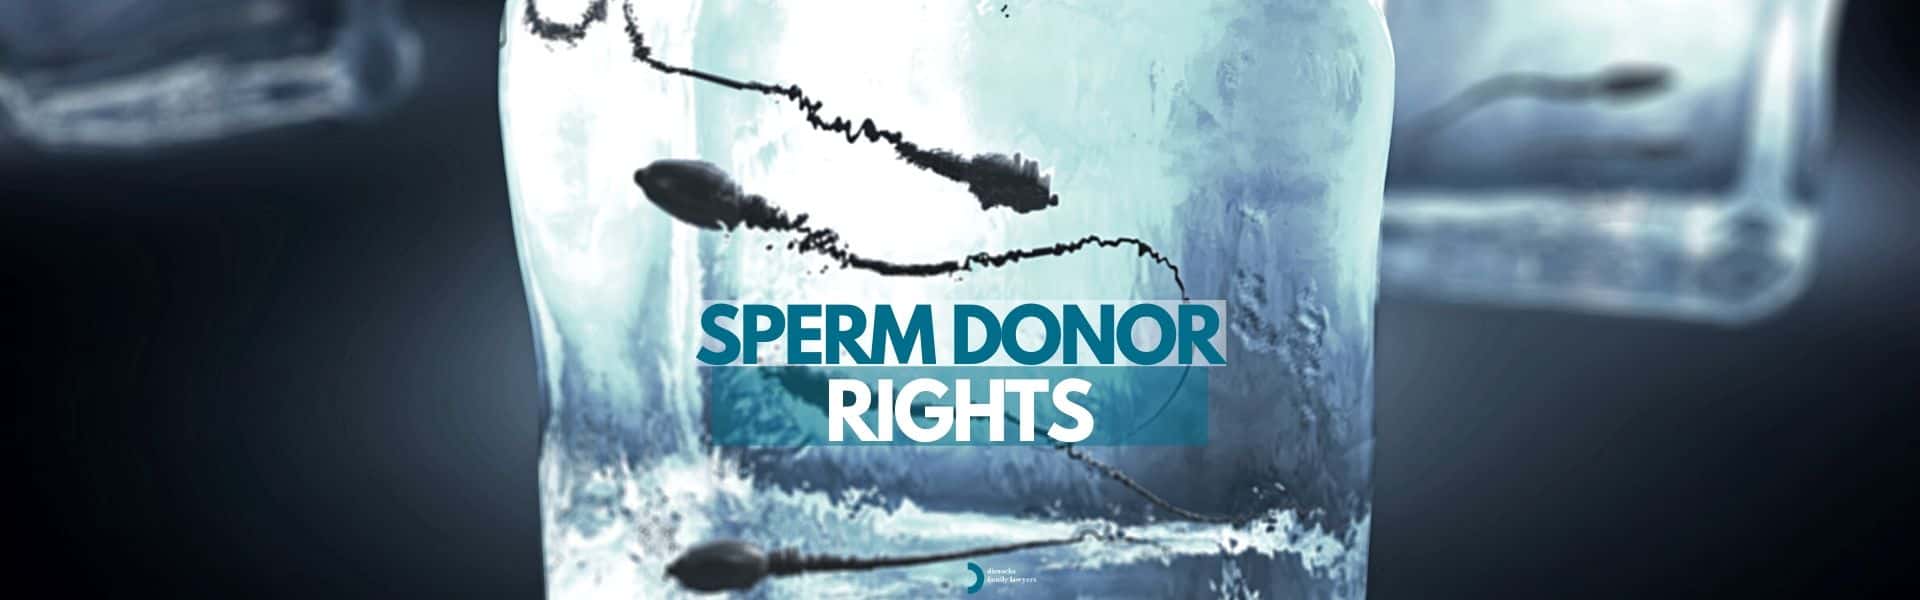 Sperm Donor Agreement Rights Sydney Family Lawyer